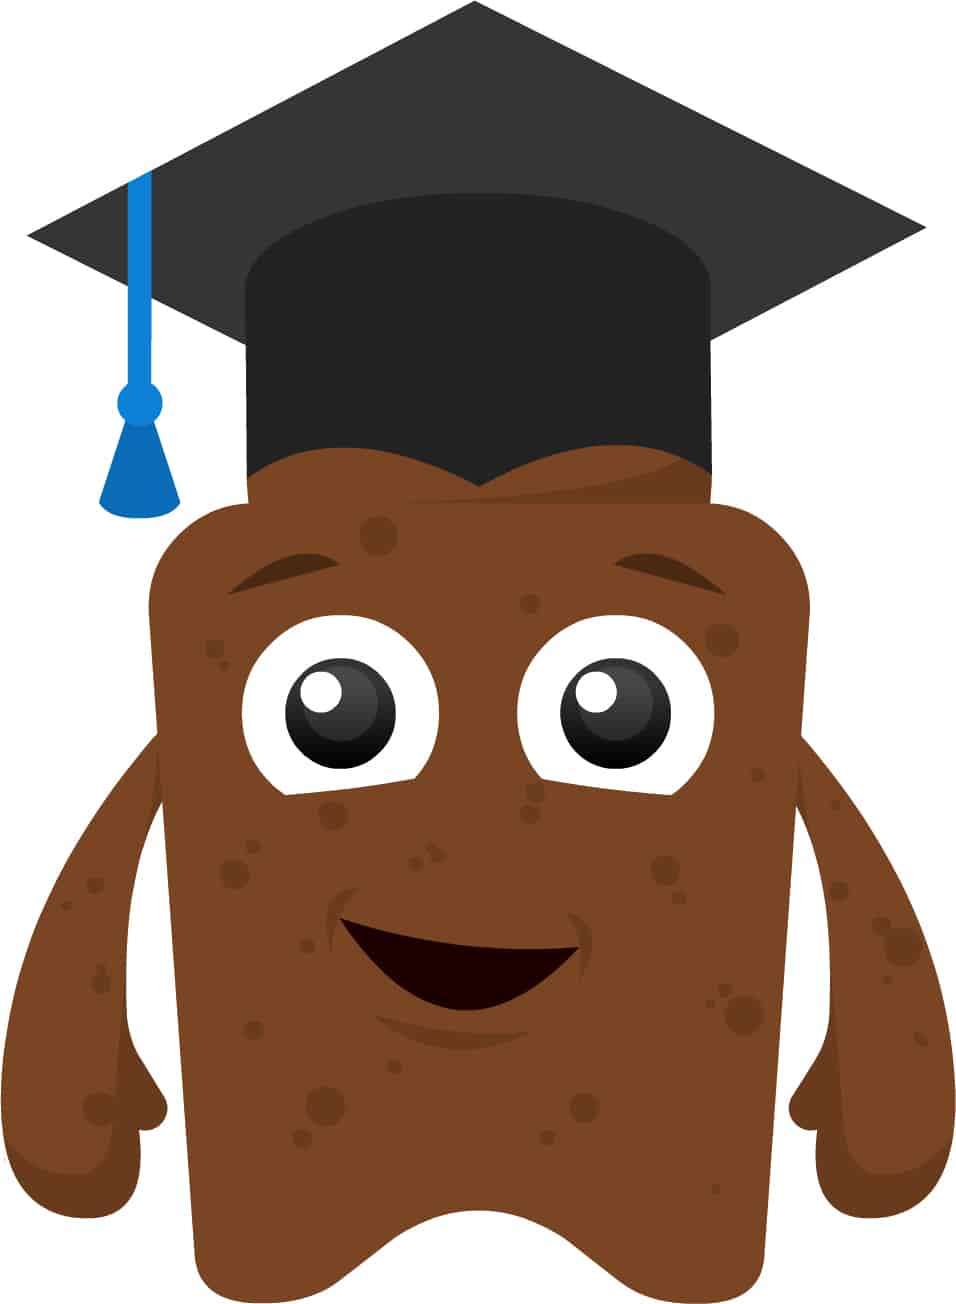 Poo character with mortarboard